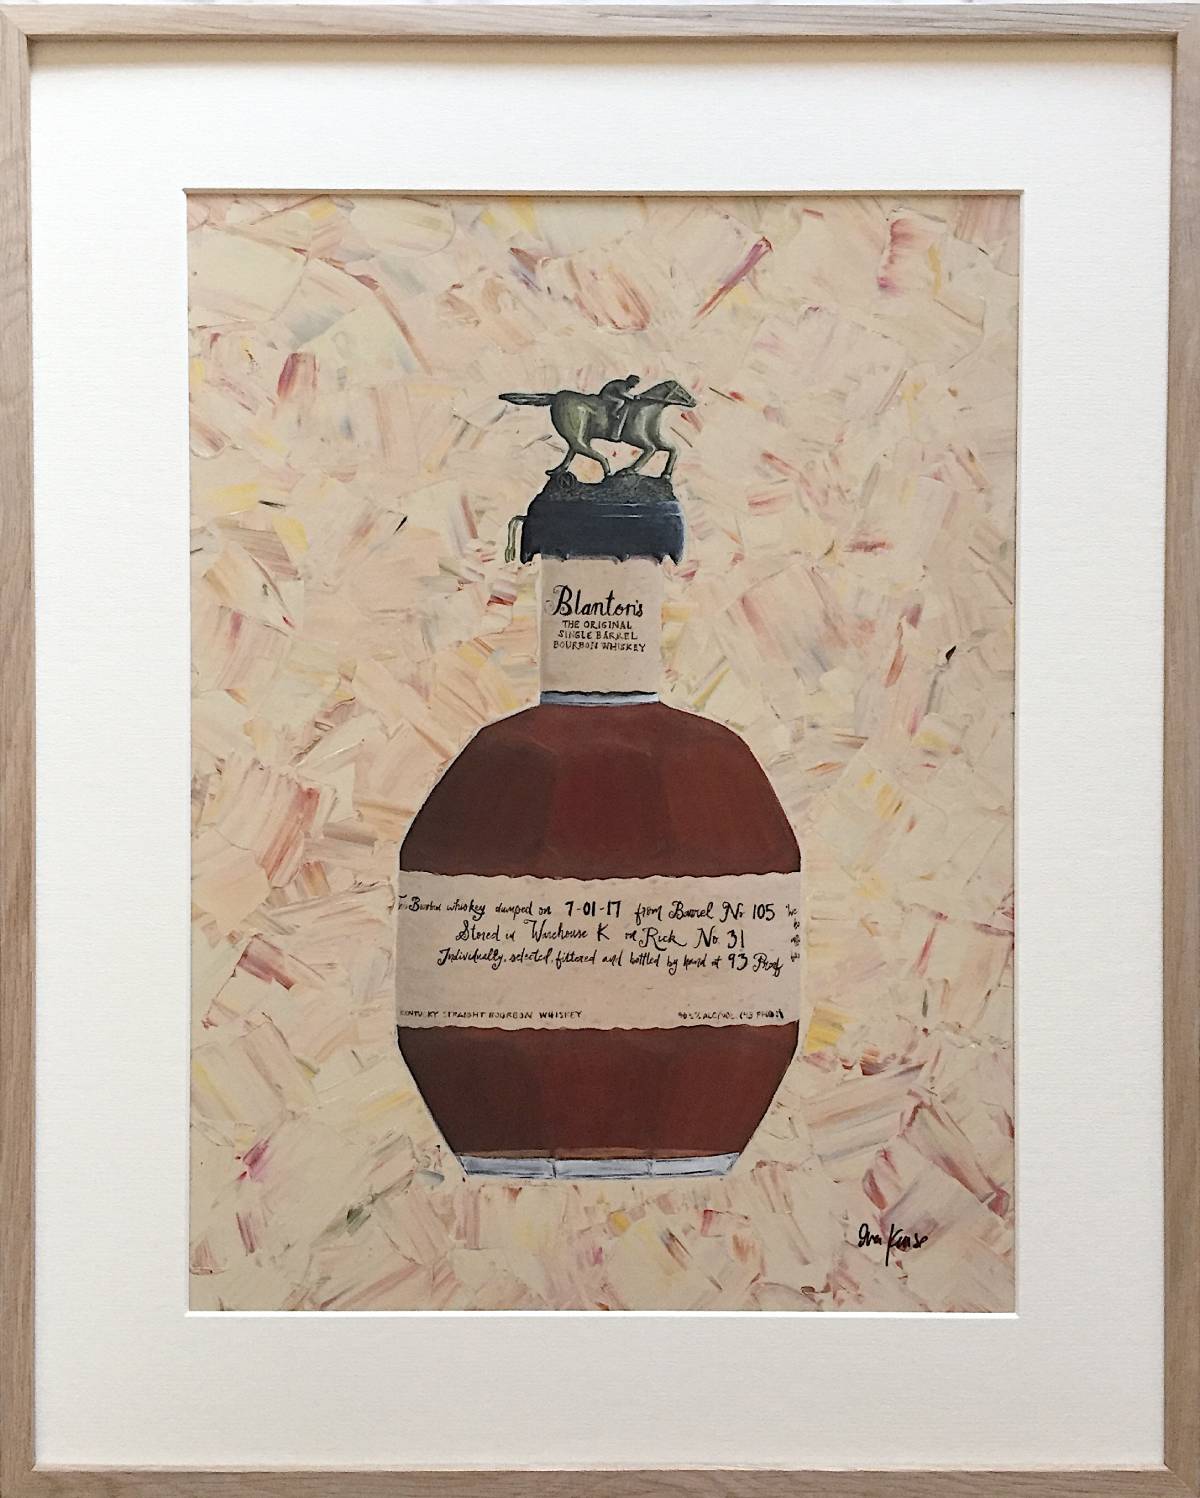 An acrylic painting of a Blanton's bourbon bottle with a textured beige background